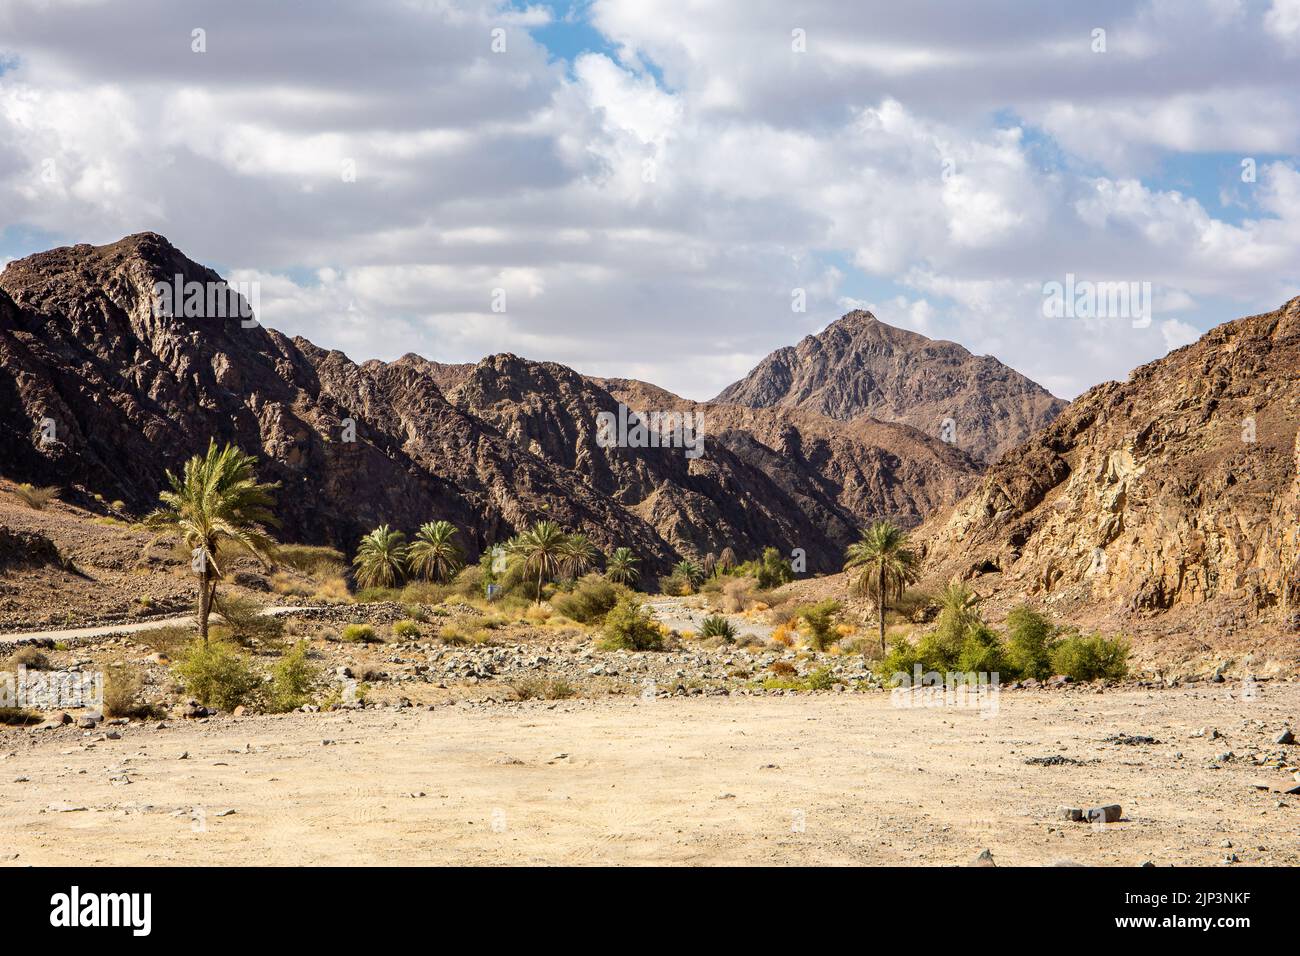 Wadi Shawka riverbed in Hajar Mountains, with oasis, palm trees and plants, rocky limestone mountains in the background, United Arab Emirates. Stock Photo